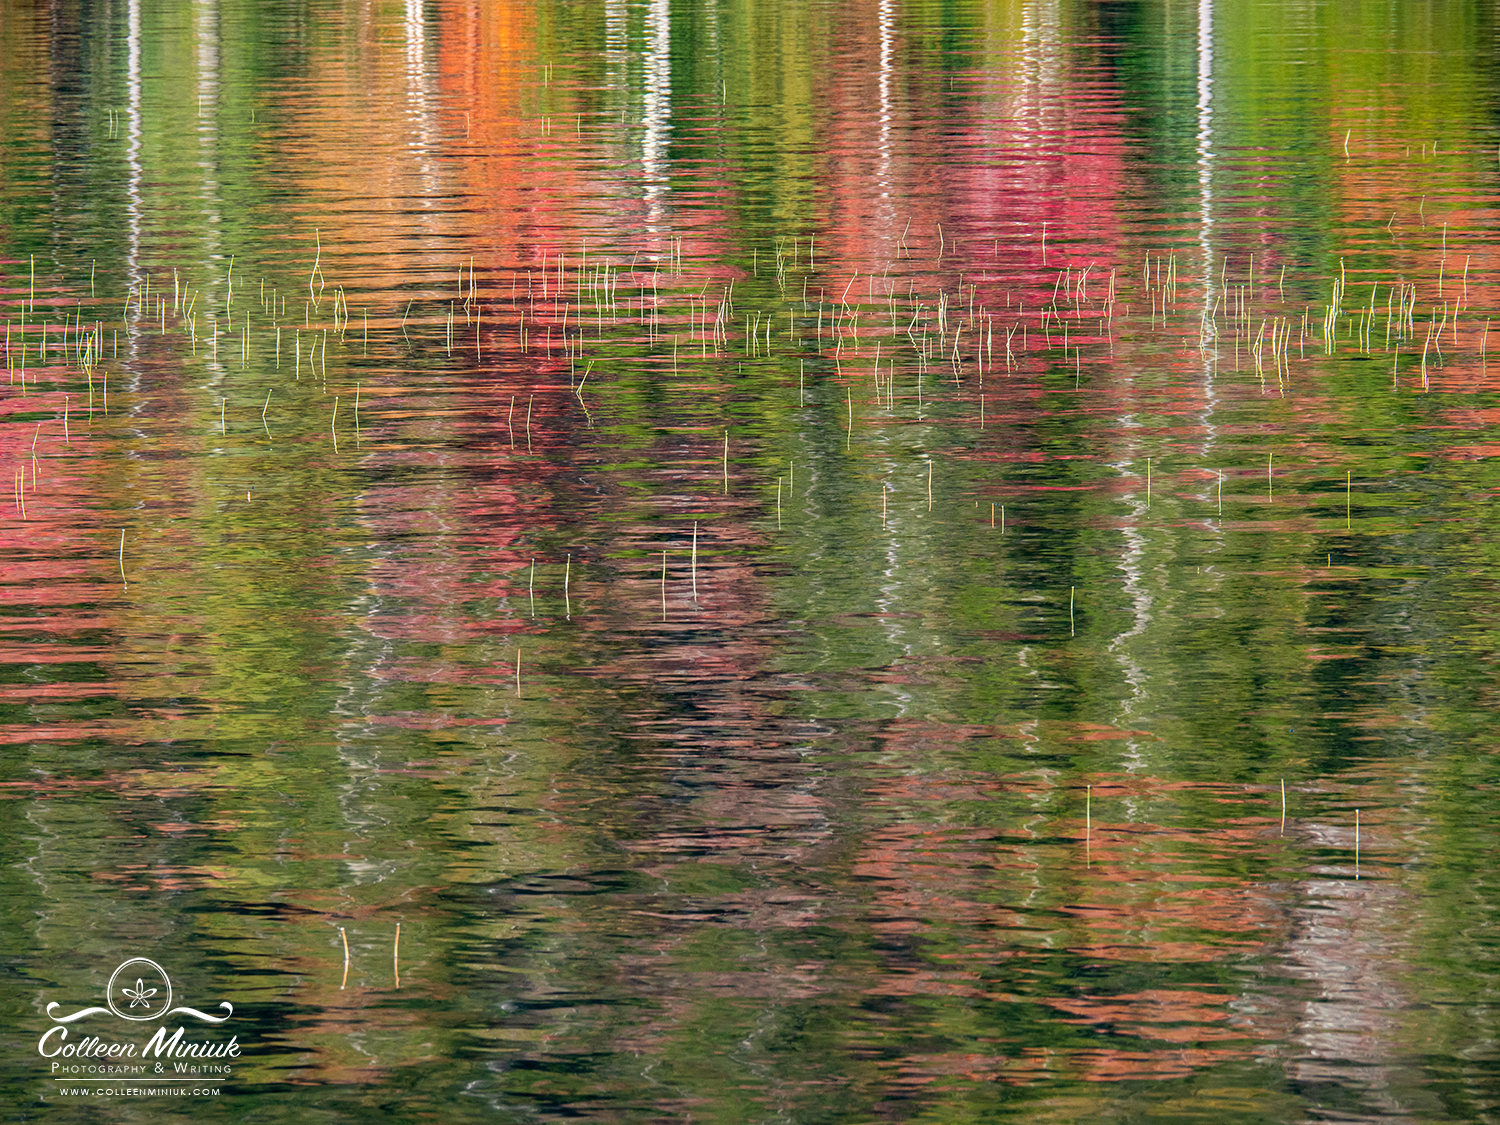 Grass and water reflections in Jordan Pond in Acadia National Park, ME